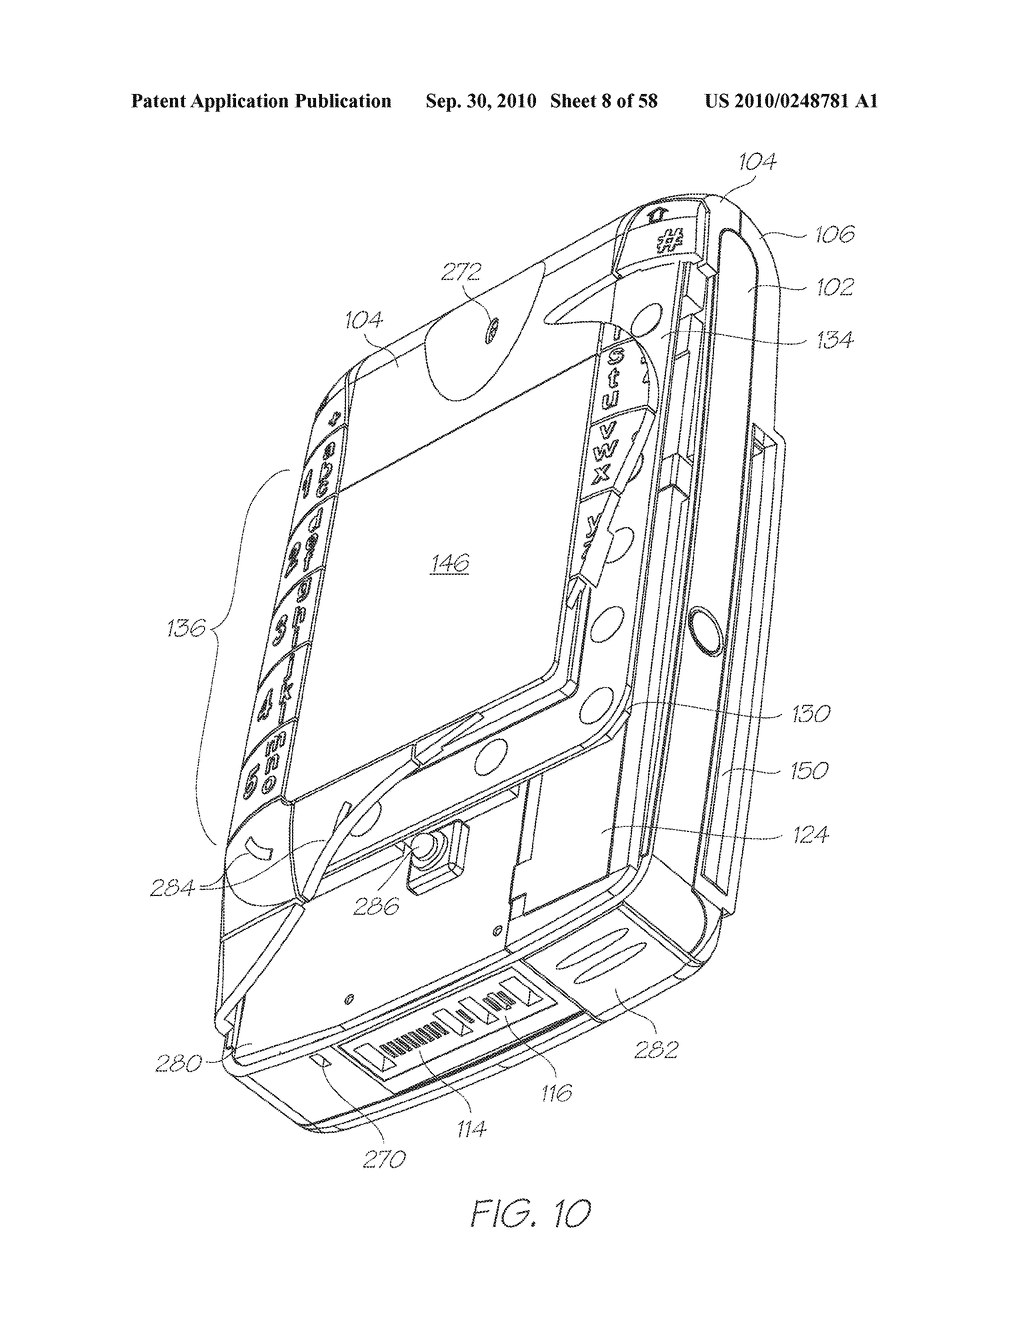 MOBILE TELECOMMUNICATIONS DEVICE WITH IMAGE SENSOR DIRECTED INTERNALLY AND EXTERNALLY - diagram, schematic, and image 09